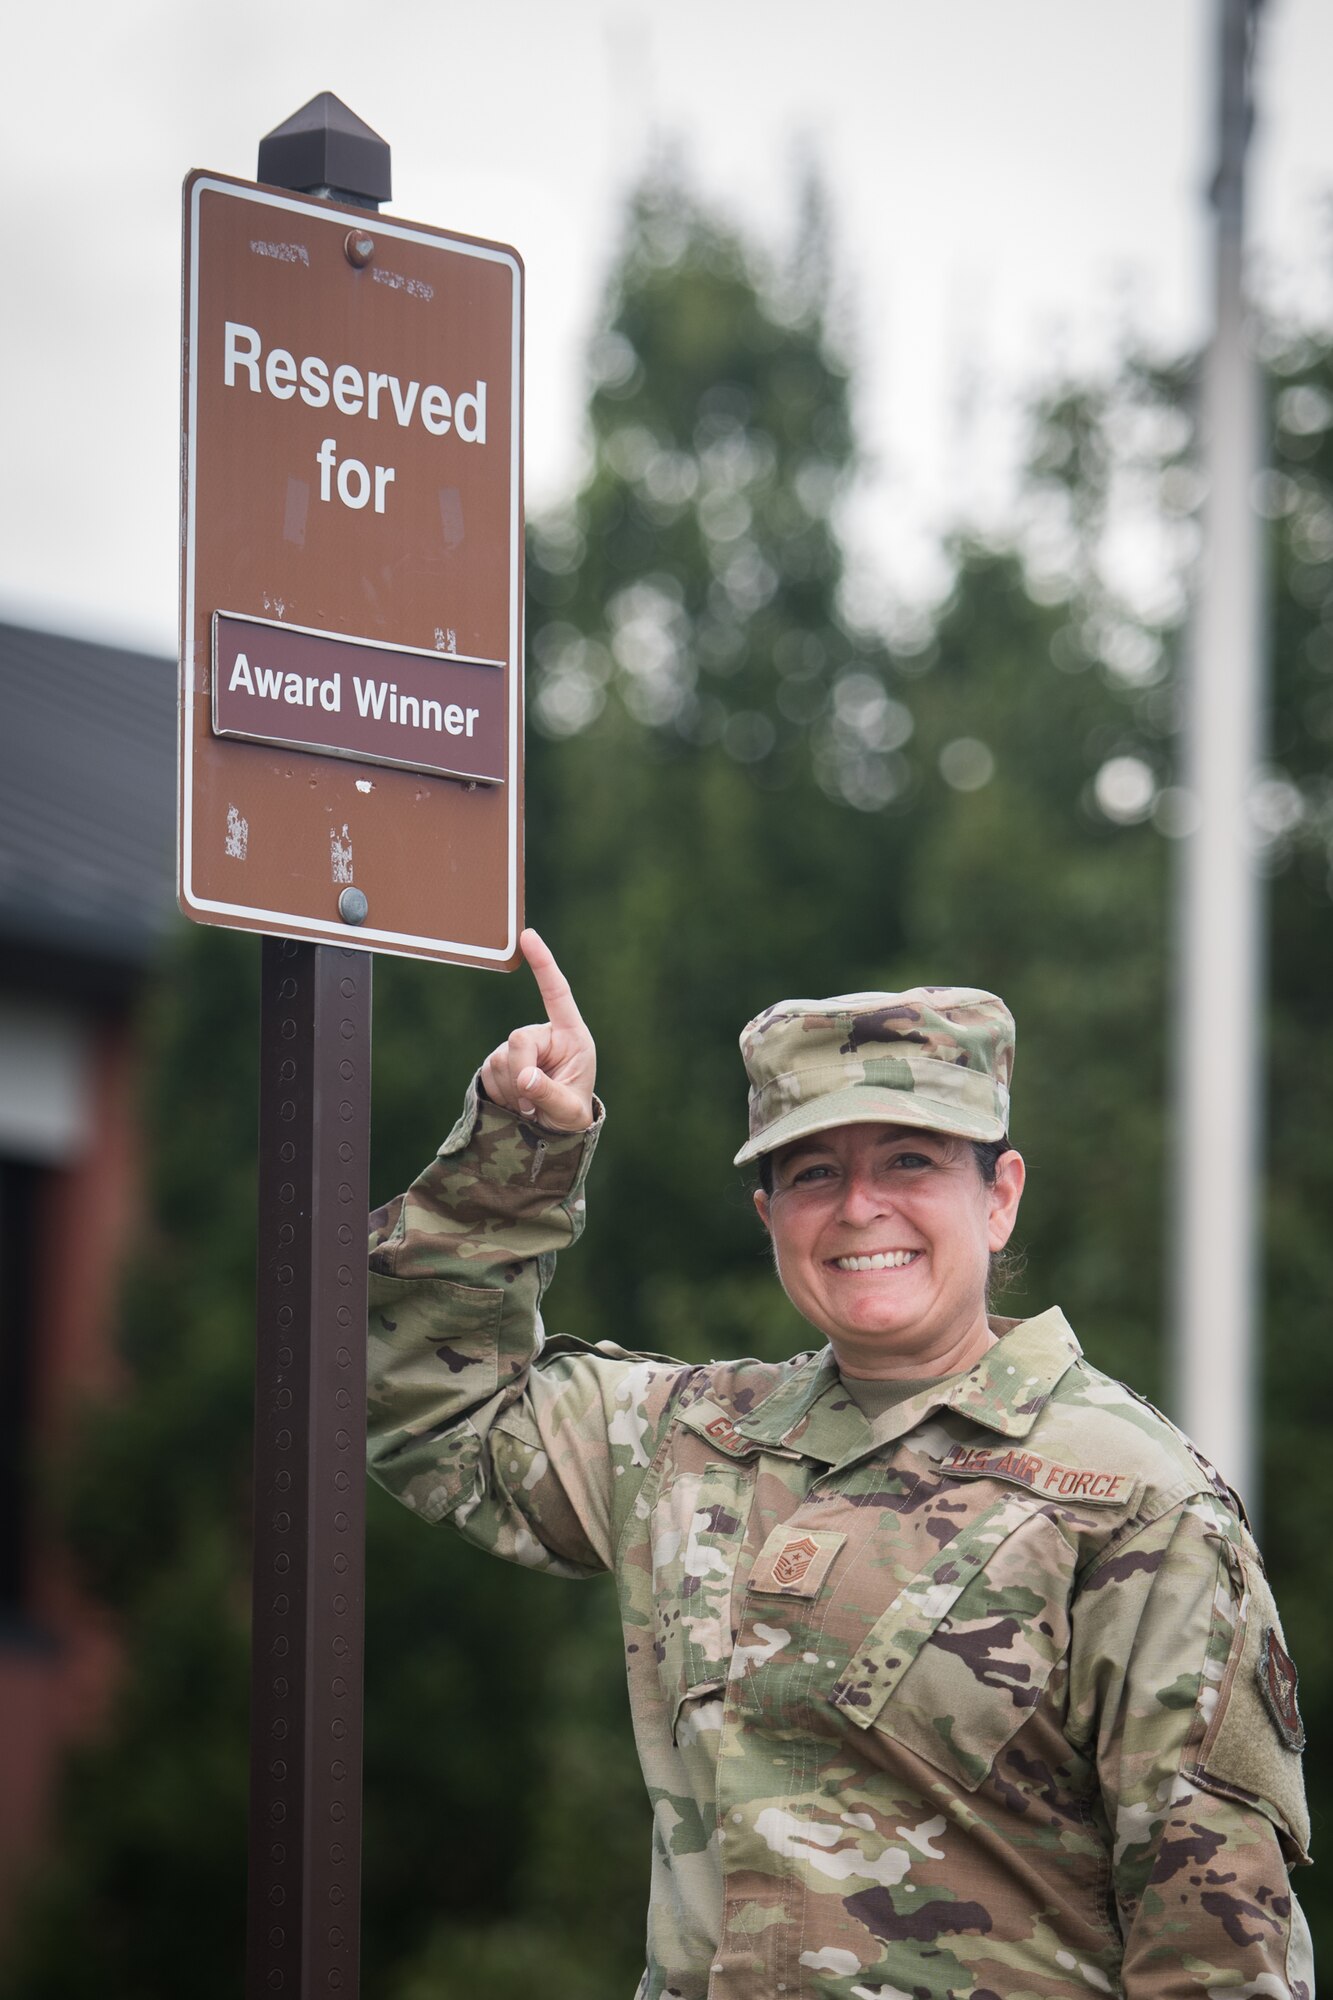 Chief Master Sgt. Barbara Gilmore, command chief, 932nd Airlift Wing, showcases the new allocated parking spot located in the front of the 932nd AW Headquarters building, Aug. 18, 2020, Scott Air Force Base, Illinois.  932nd AW Annual and Quarterly award winners now can compete in a first-come competition for front row prime parking spot during weekdays and unit training assembly (UTA) weekends. “With parking sometimes limited during a UTA weekend, I wanted to find a way to honor our award winners for prime parking, said Gilmore about the importance of creating the parking spot for award winners. (U.S. Air Force photo by Christopher Parr)